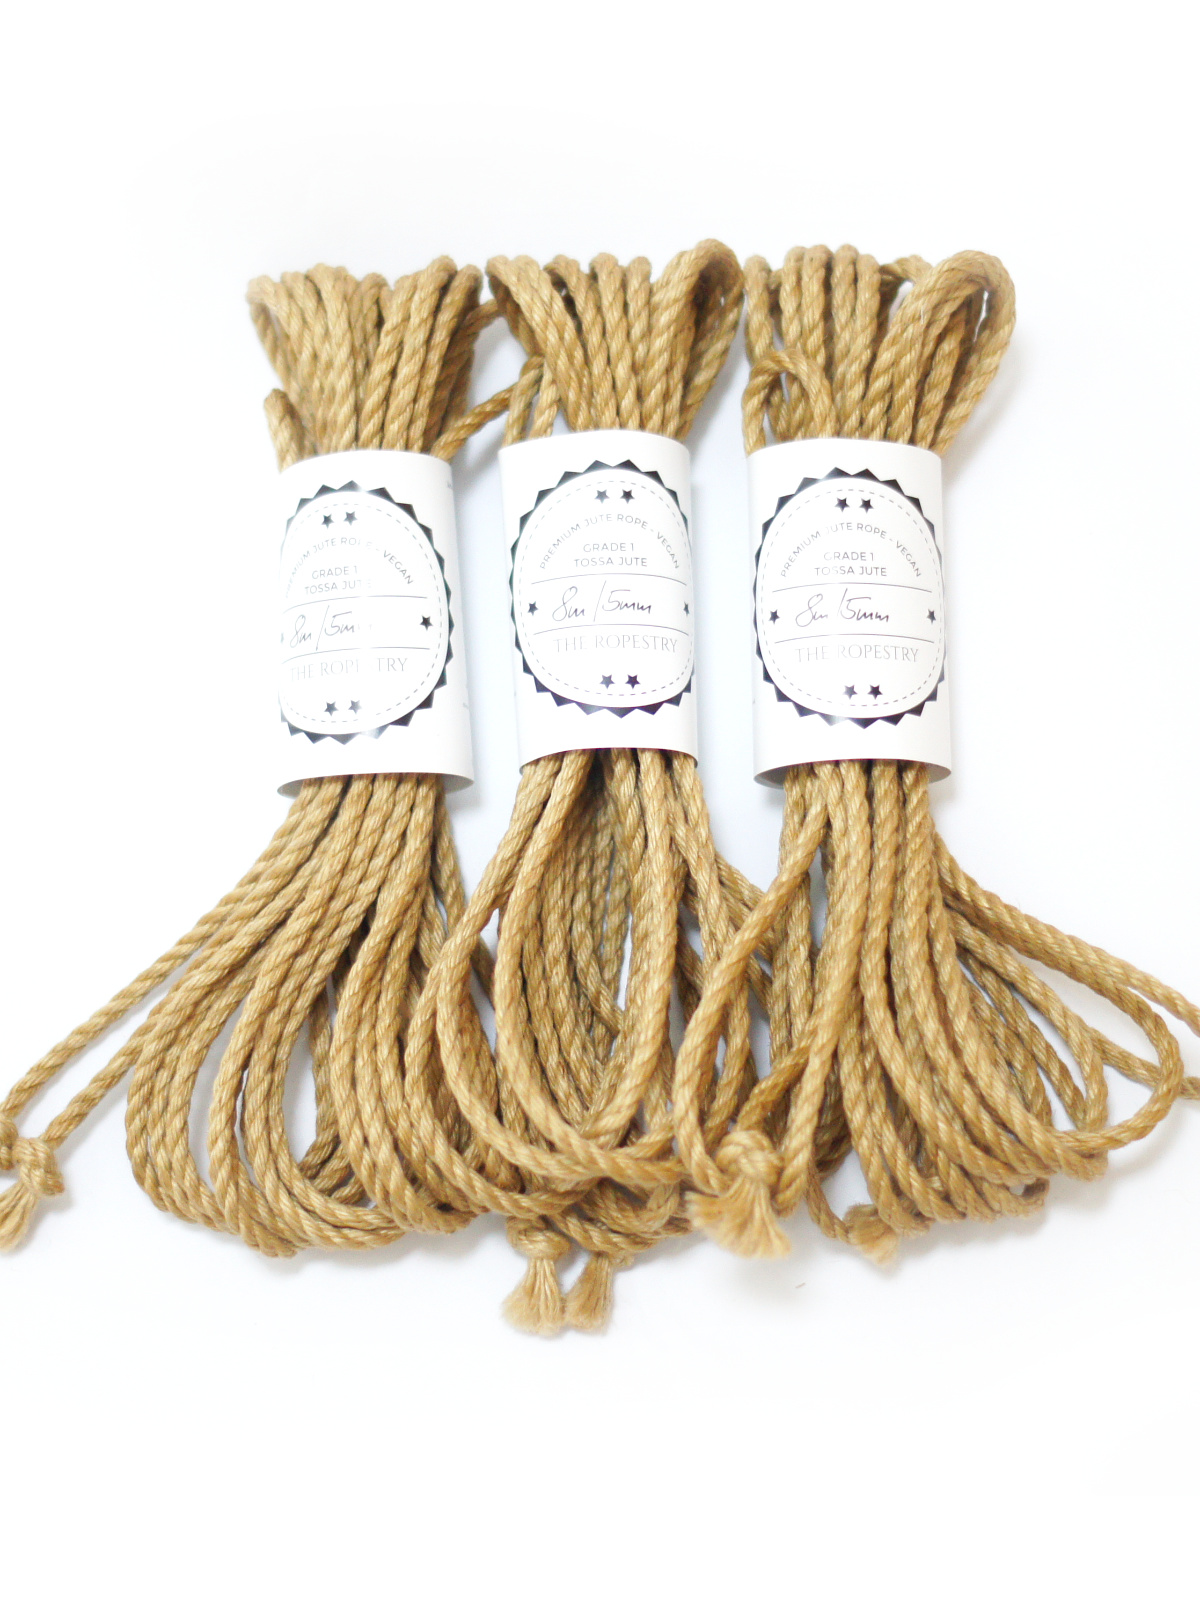 B-STOCK 3pc set, ∅ 5mm, 8m, jute rope, ready for use 